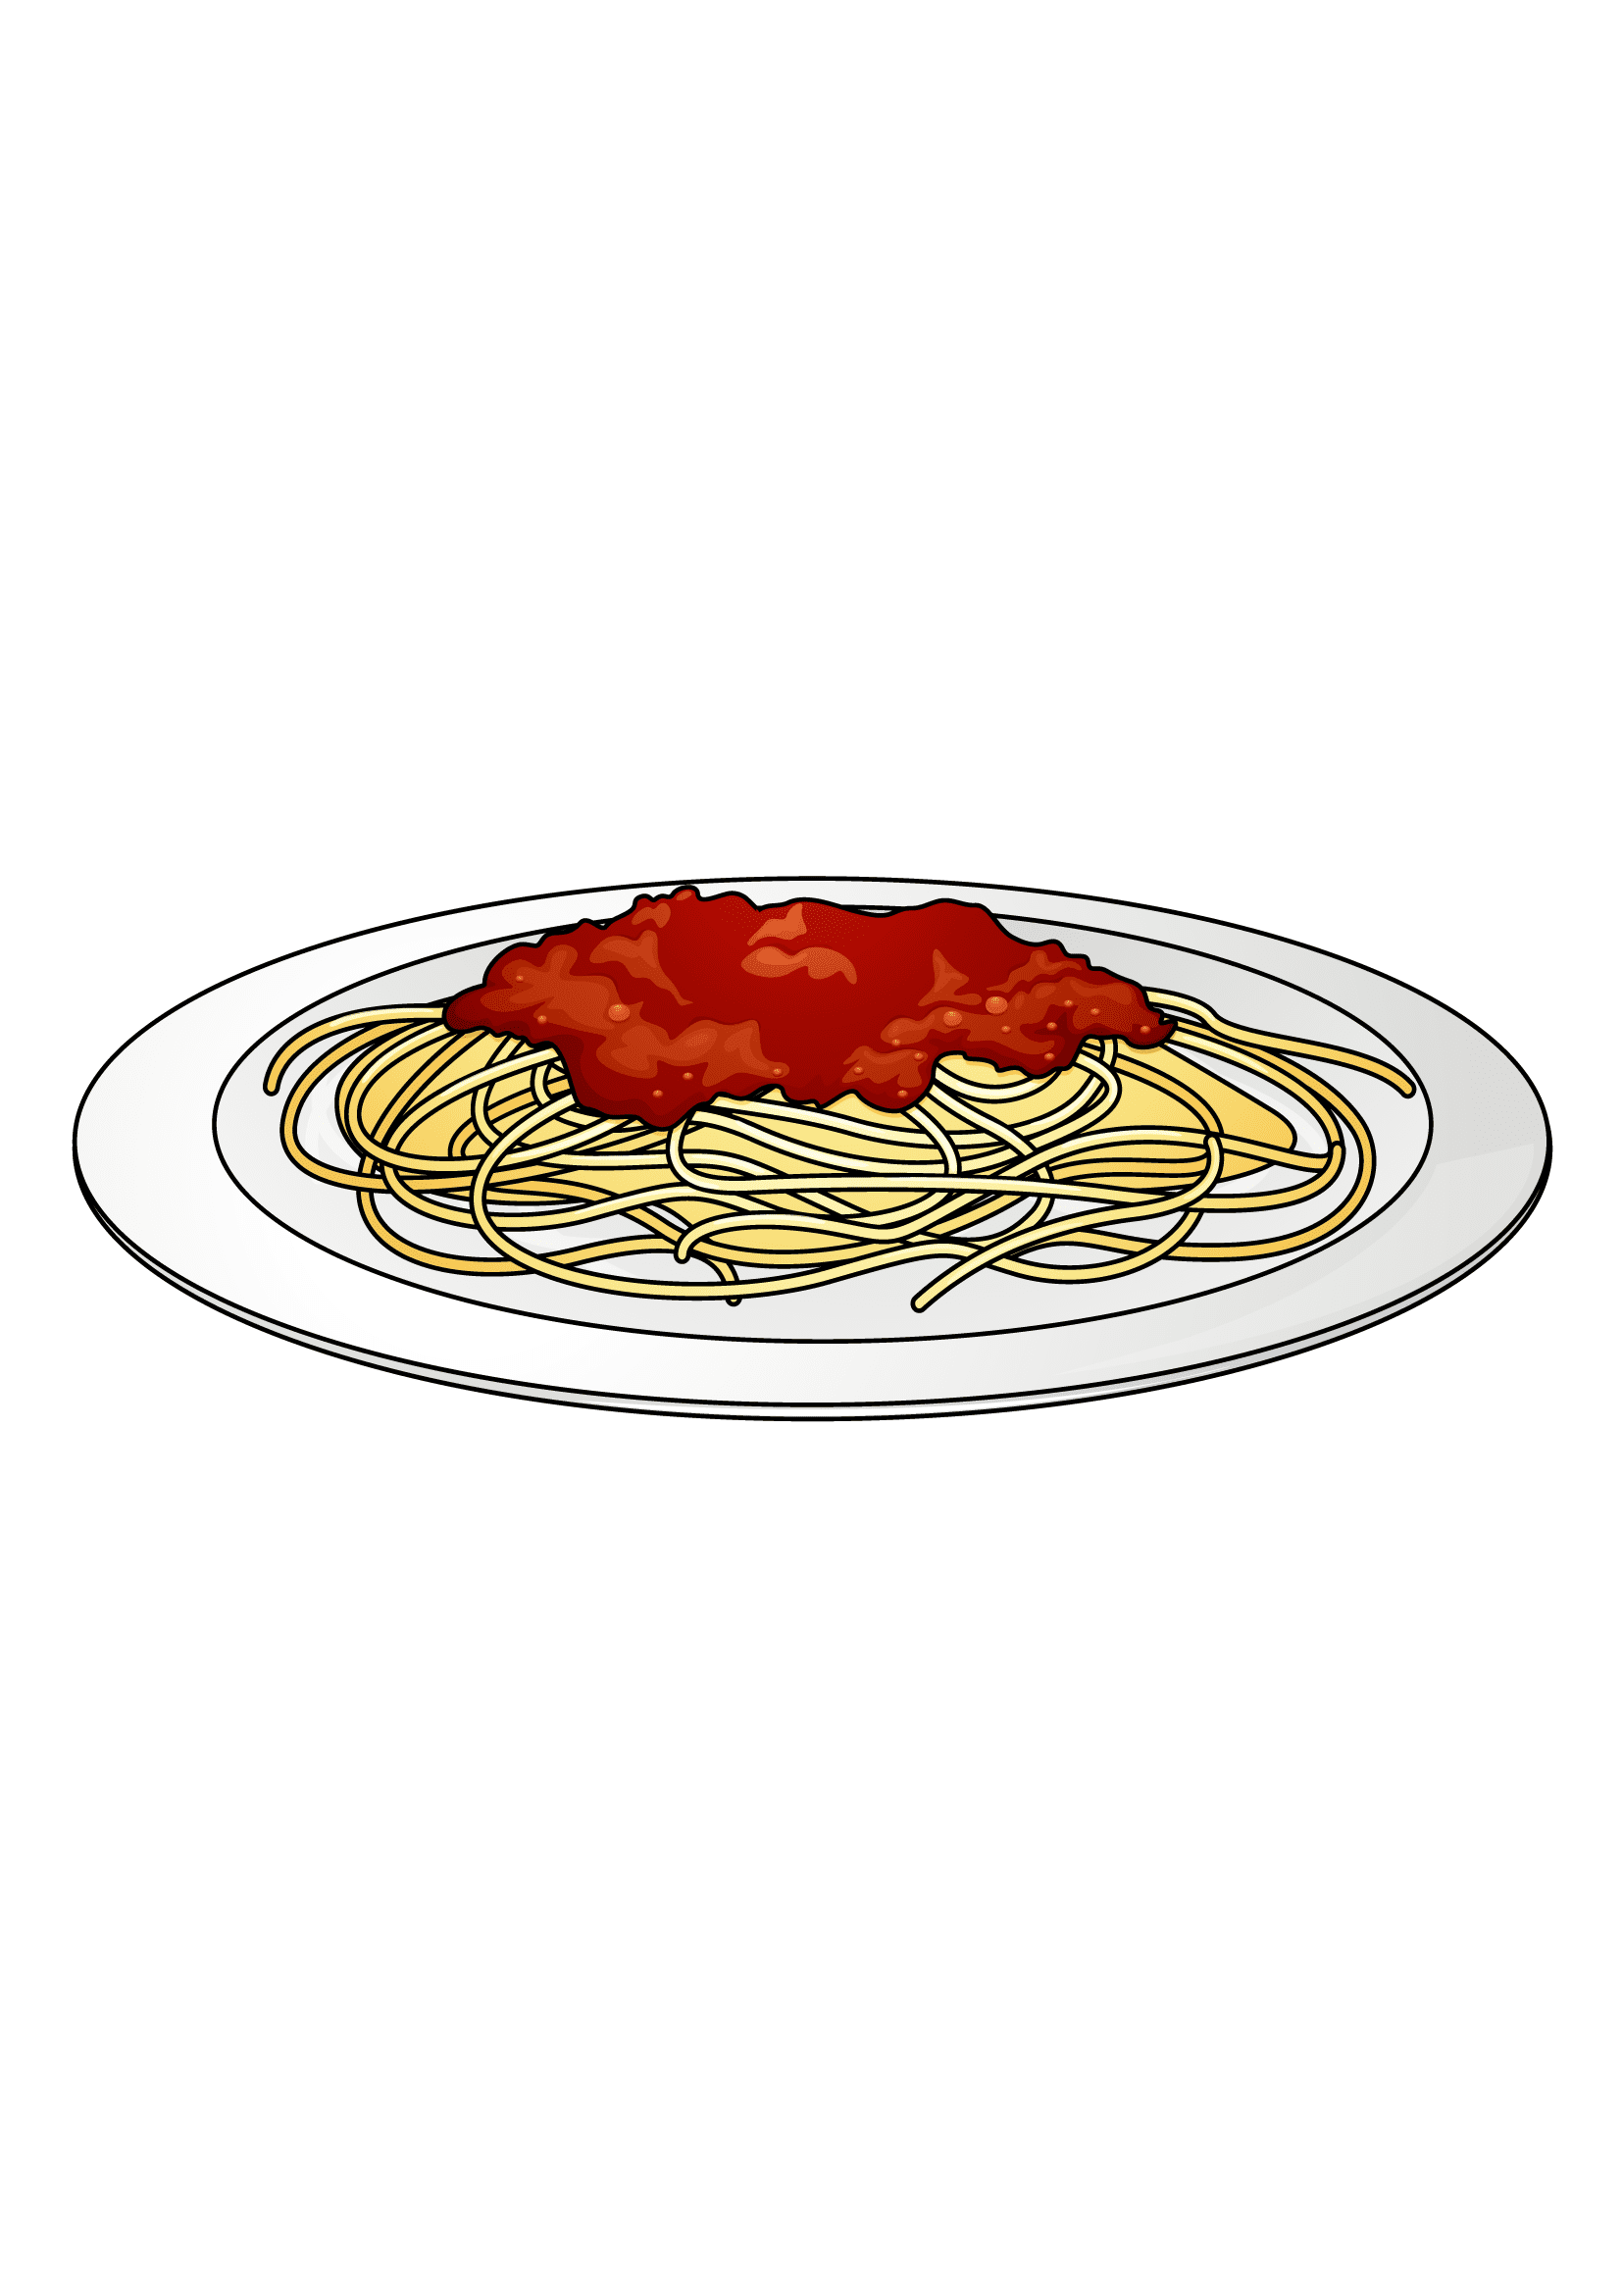 How to Draw Spaghetti Step by Step Printable